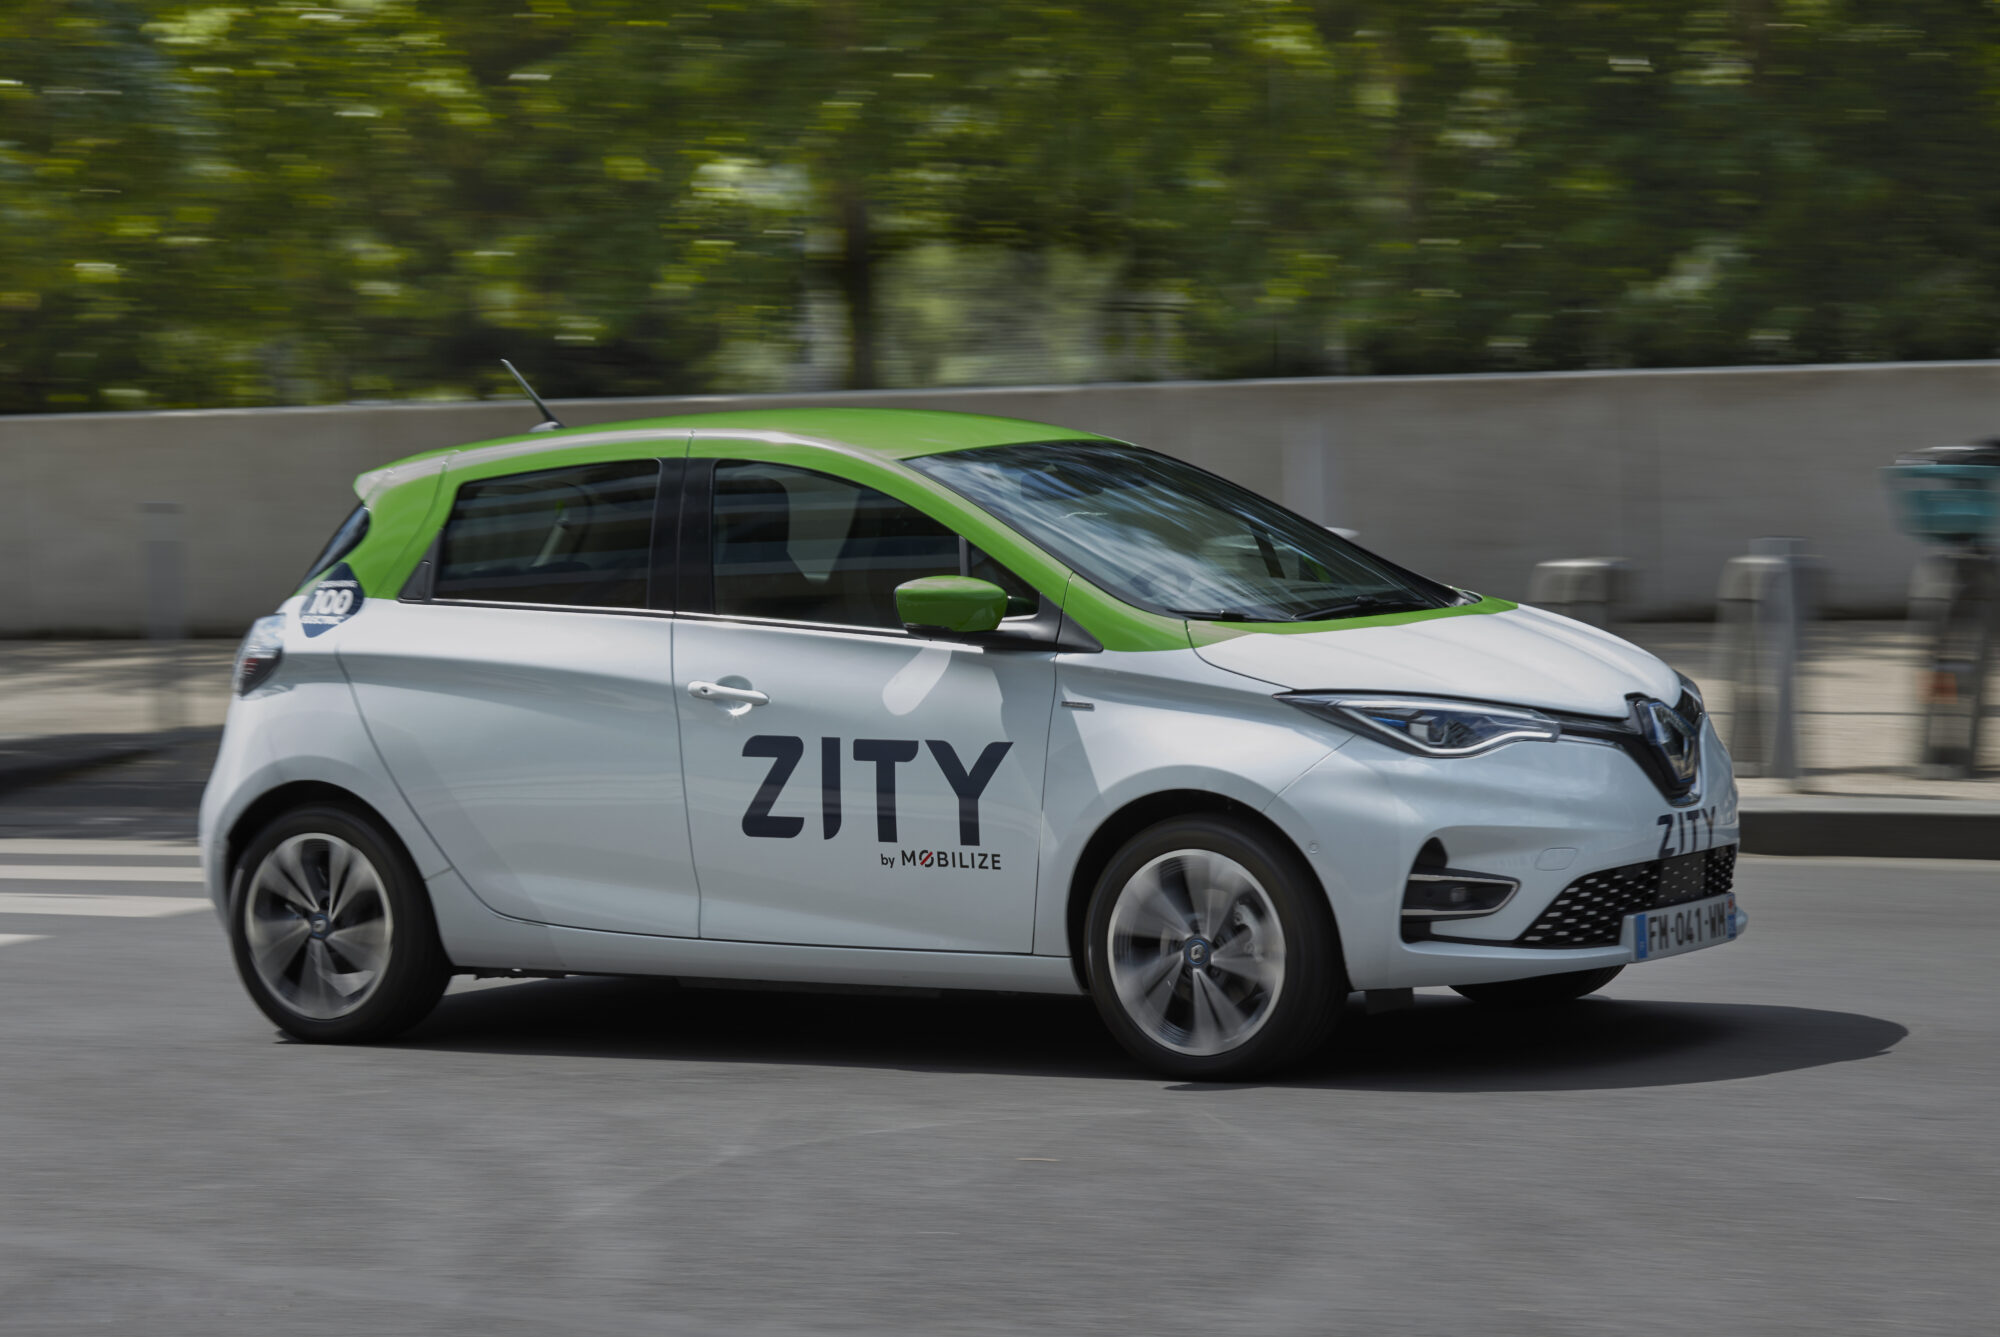 2021 - Zity by Mobilize